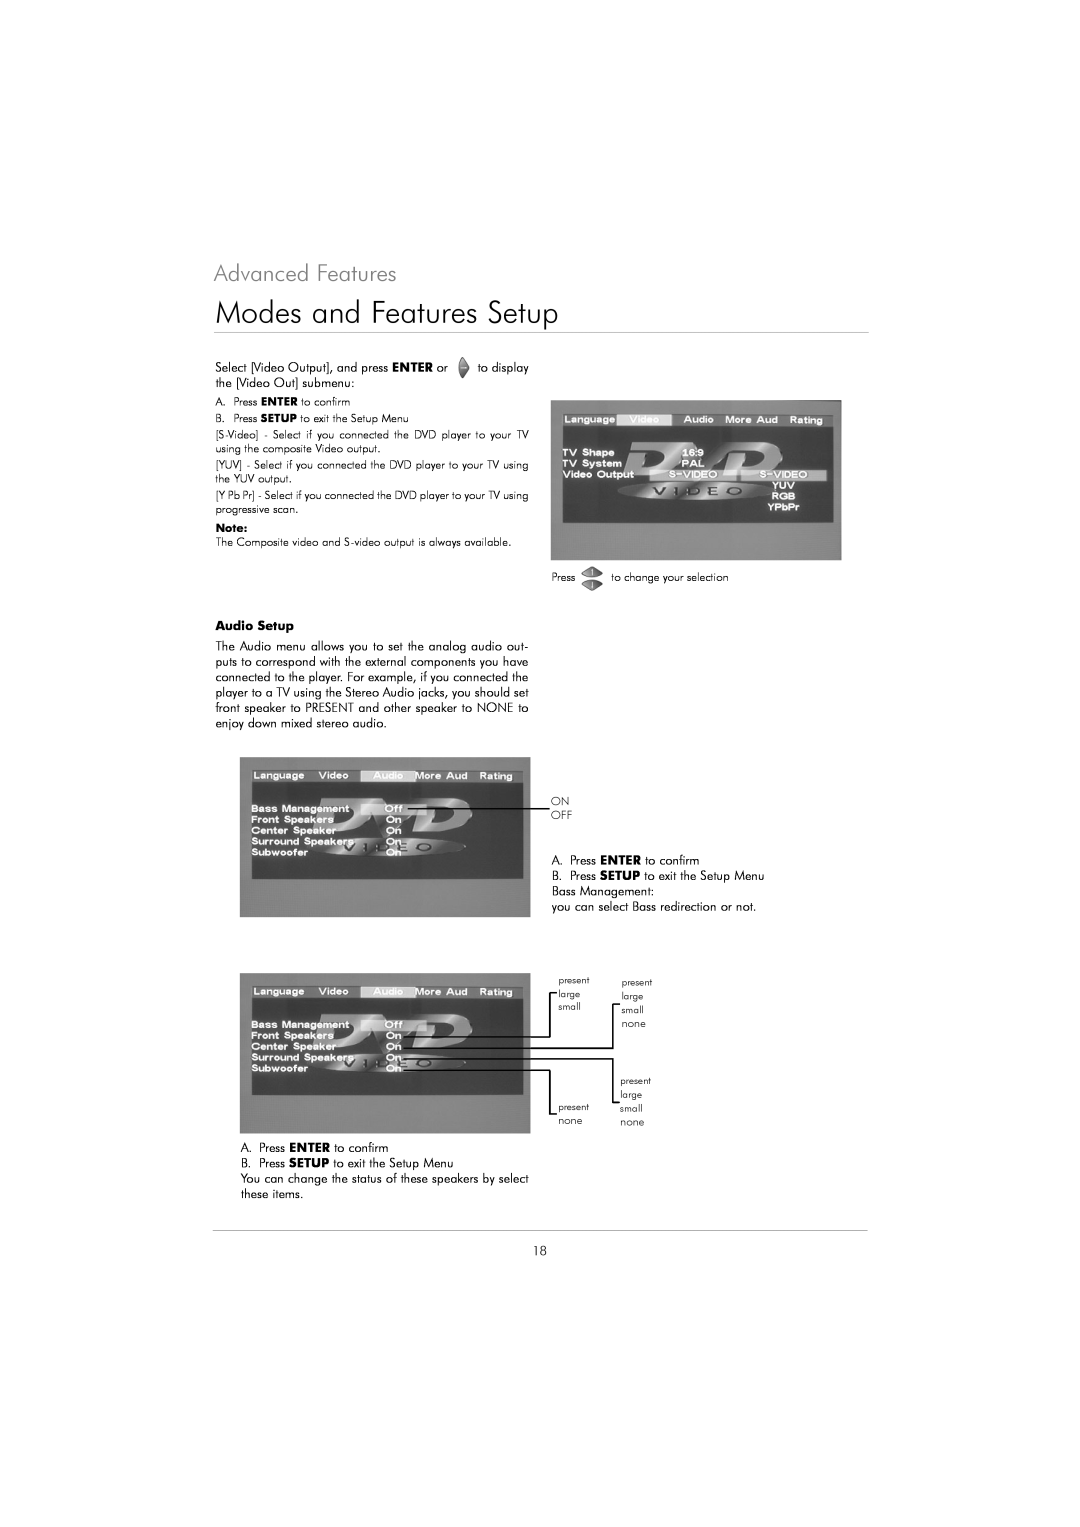 Kodak DVD 40 user manual Audio Setup, Modes and Features Setup, Advanced Features, present large small 